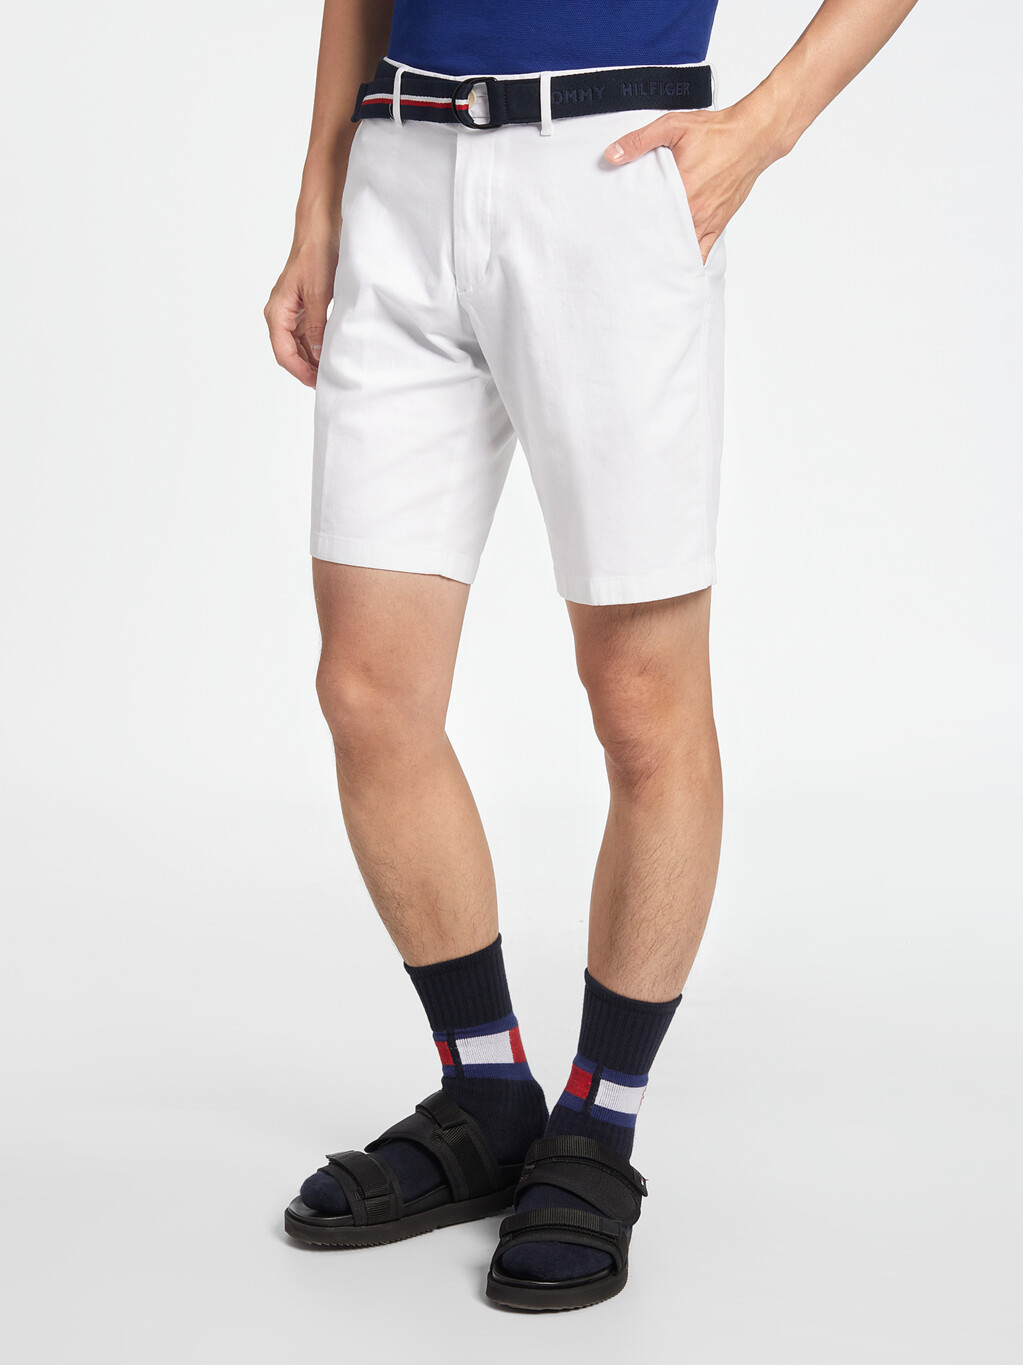 Essential Brooklyn Organic Cotton Twill Shorts With Belt, White, hi-res